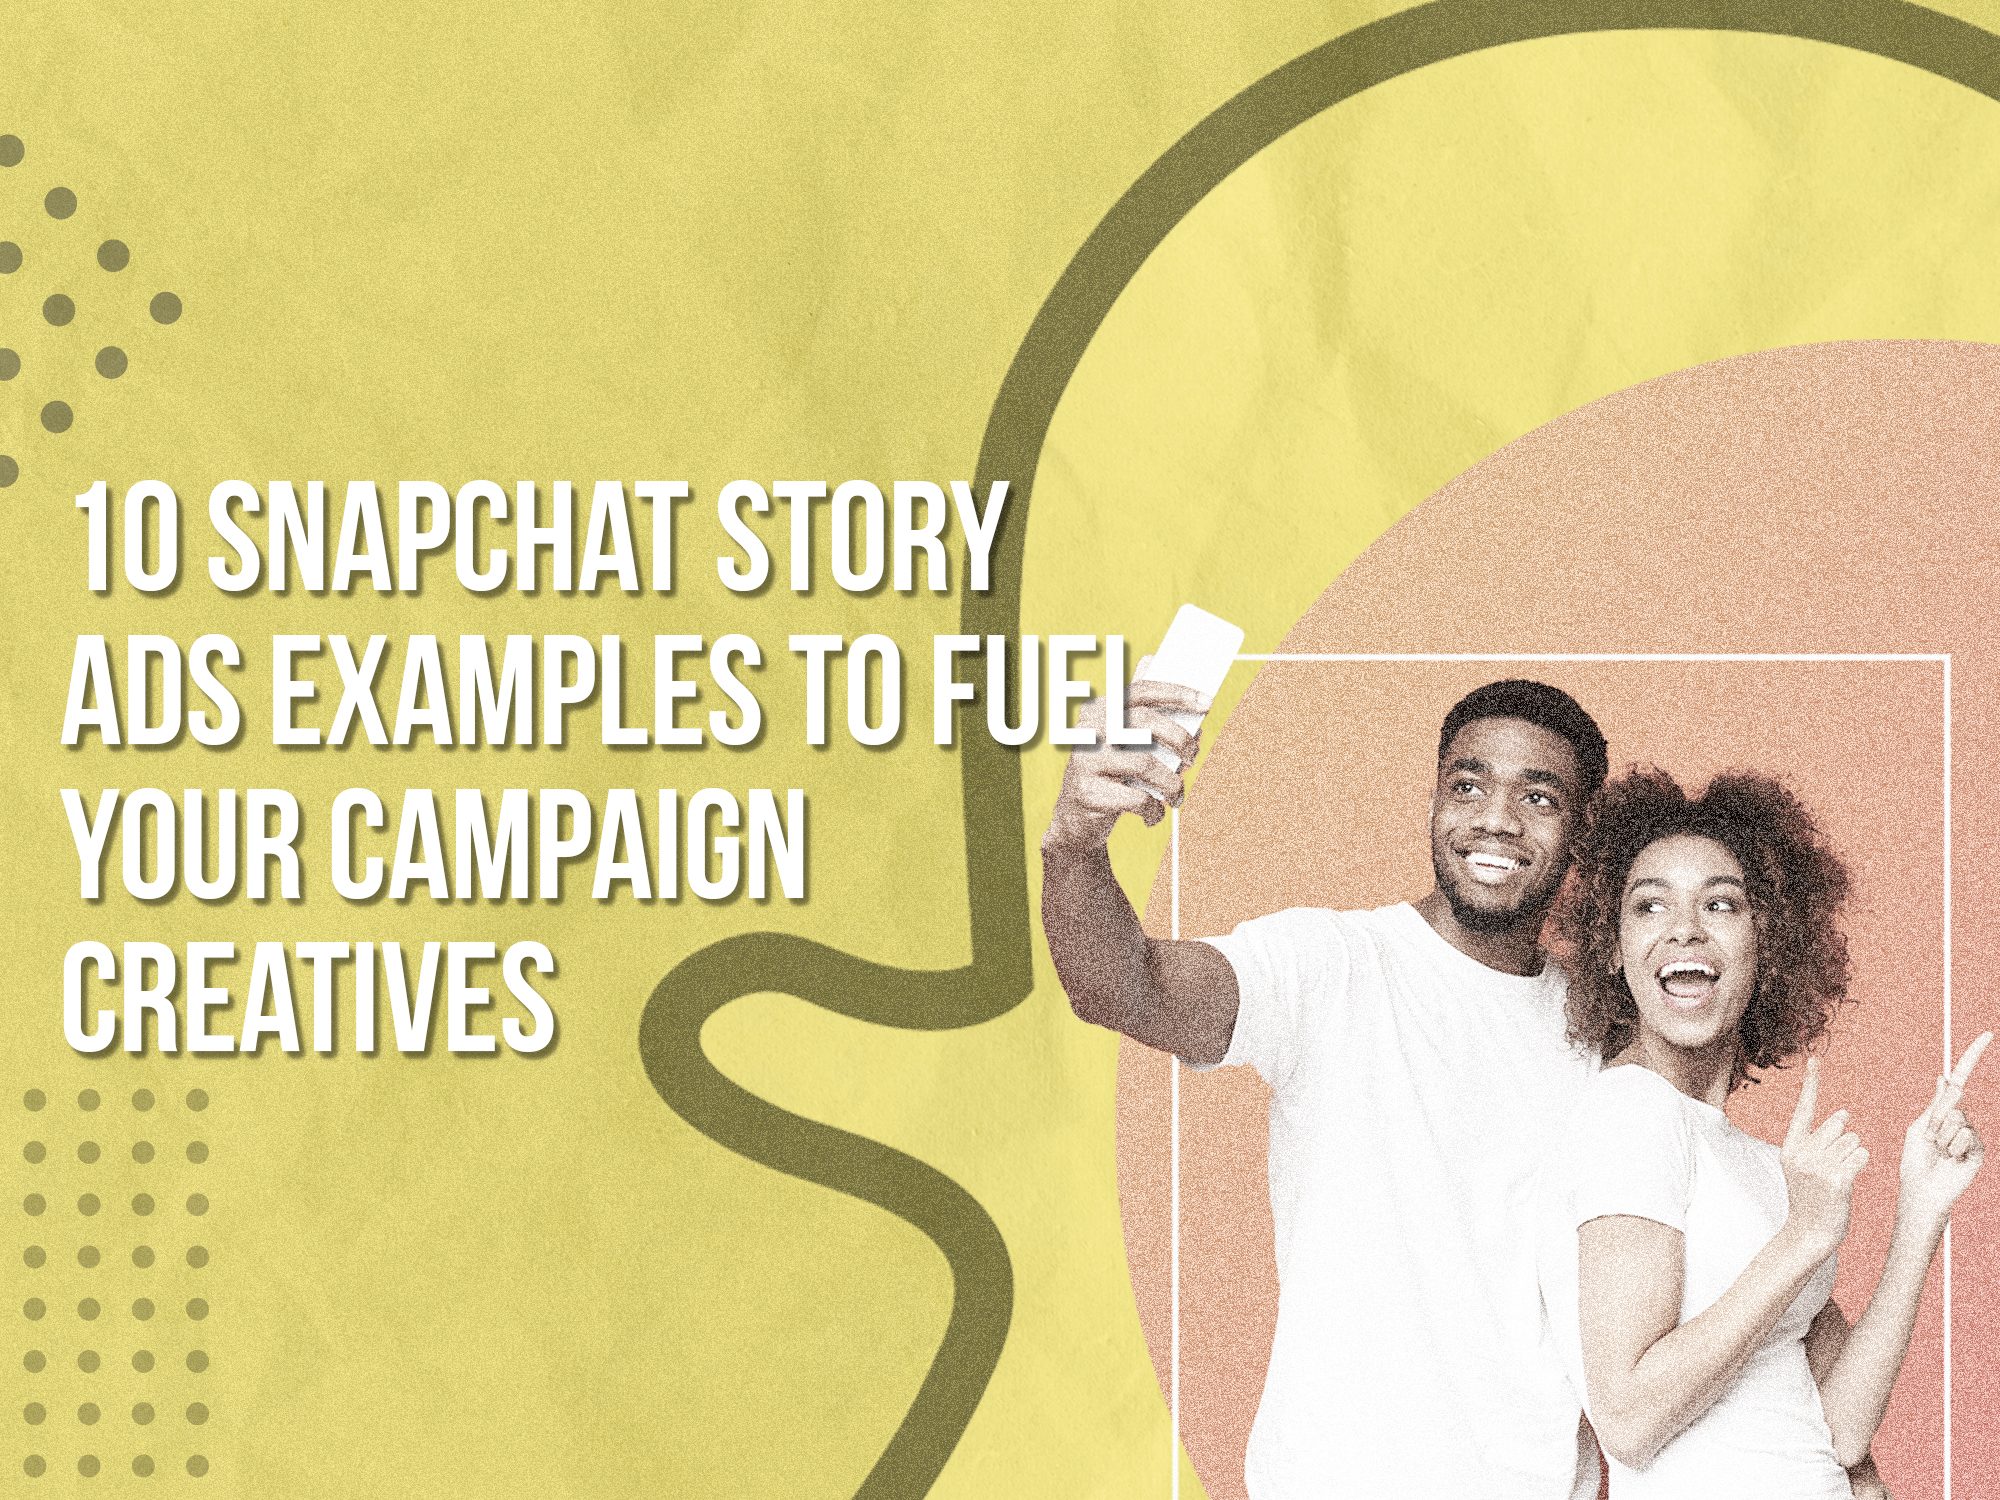 10 Snapchat Story Ads Examples to Fuel Your Campaign Creatives